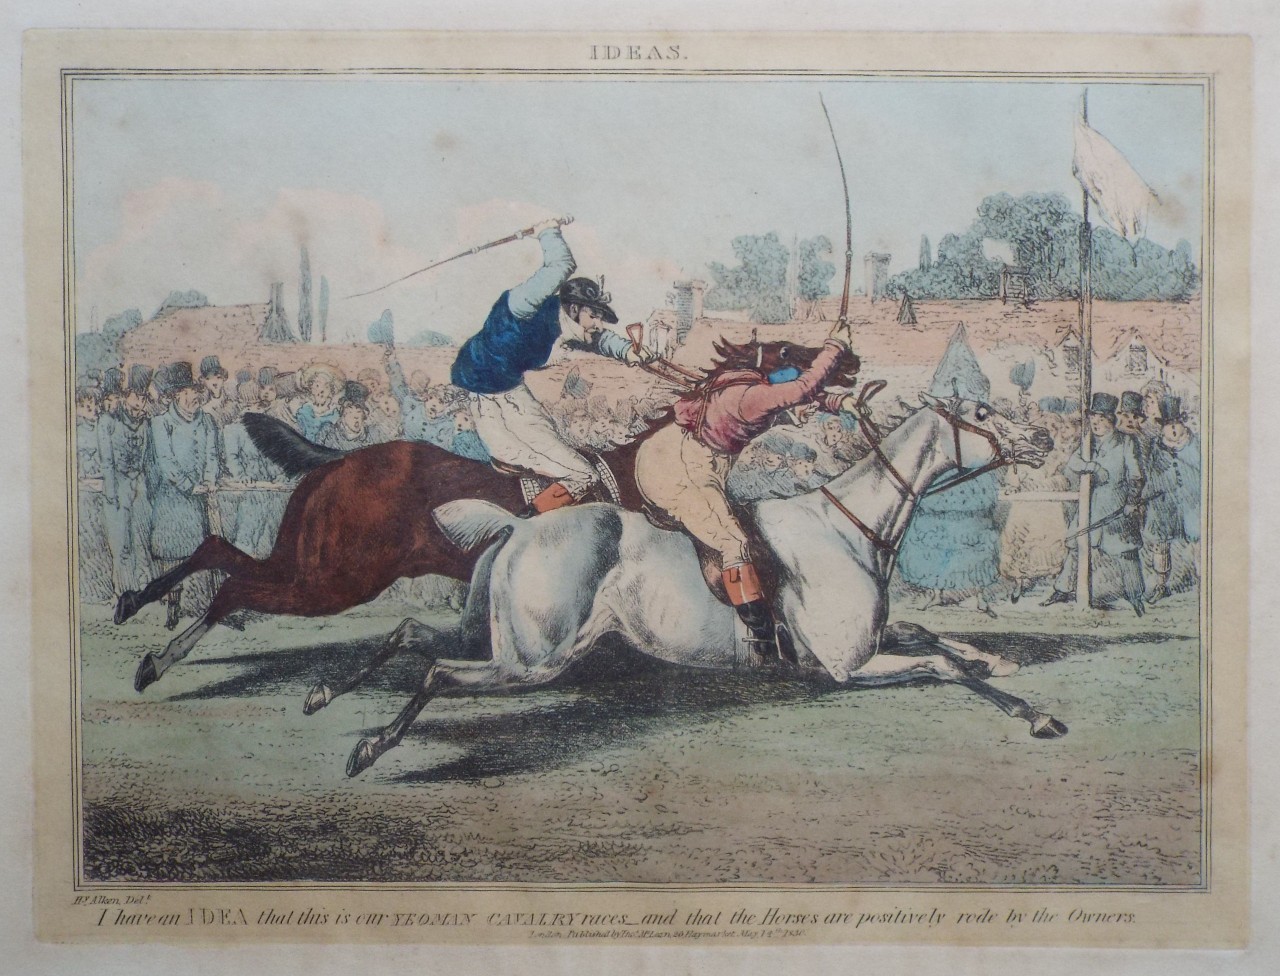 Soft-ground Etching - IDEAS. I have an IDEA that this our Yeomanry Cavalry races - and that the Horses are positively rode by the Owners.